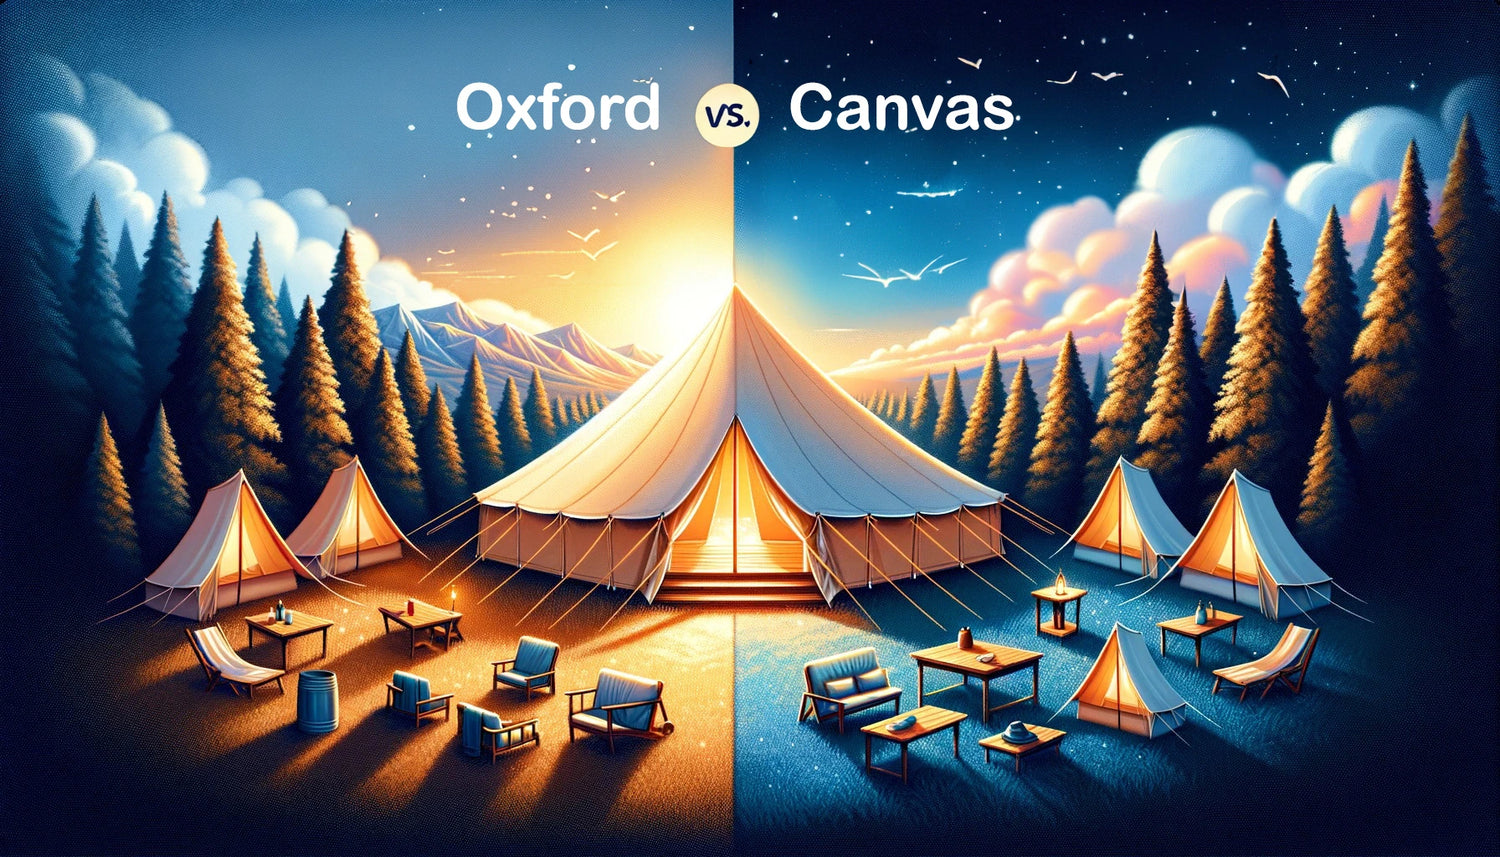 Comparison between cotton canvas and polyester oxford glamping tents highlighting polyester oxford's lightweight nature, UV protection, and maintenance ease against canvas's traditional appeal